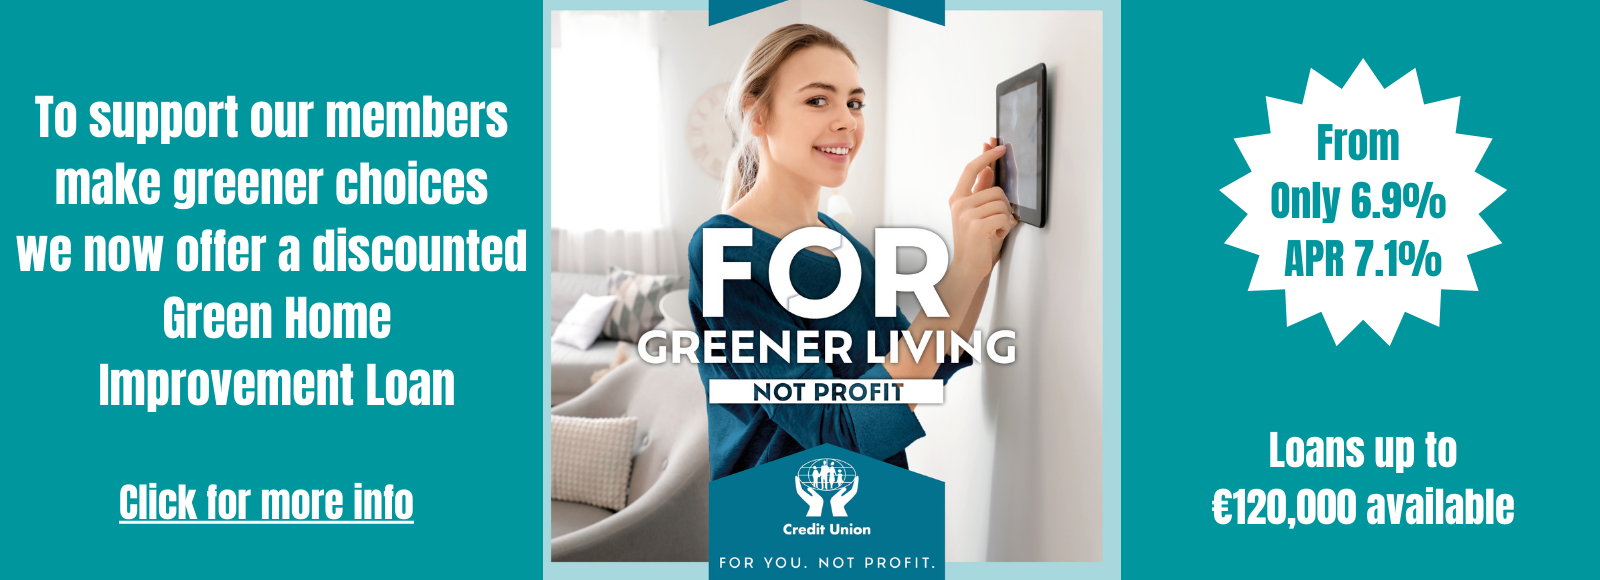 Blackrock Credit Union promoting Green Home Improvement loans featuring girl using power control touchscreen on wall